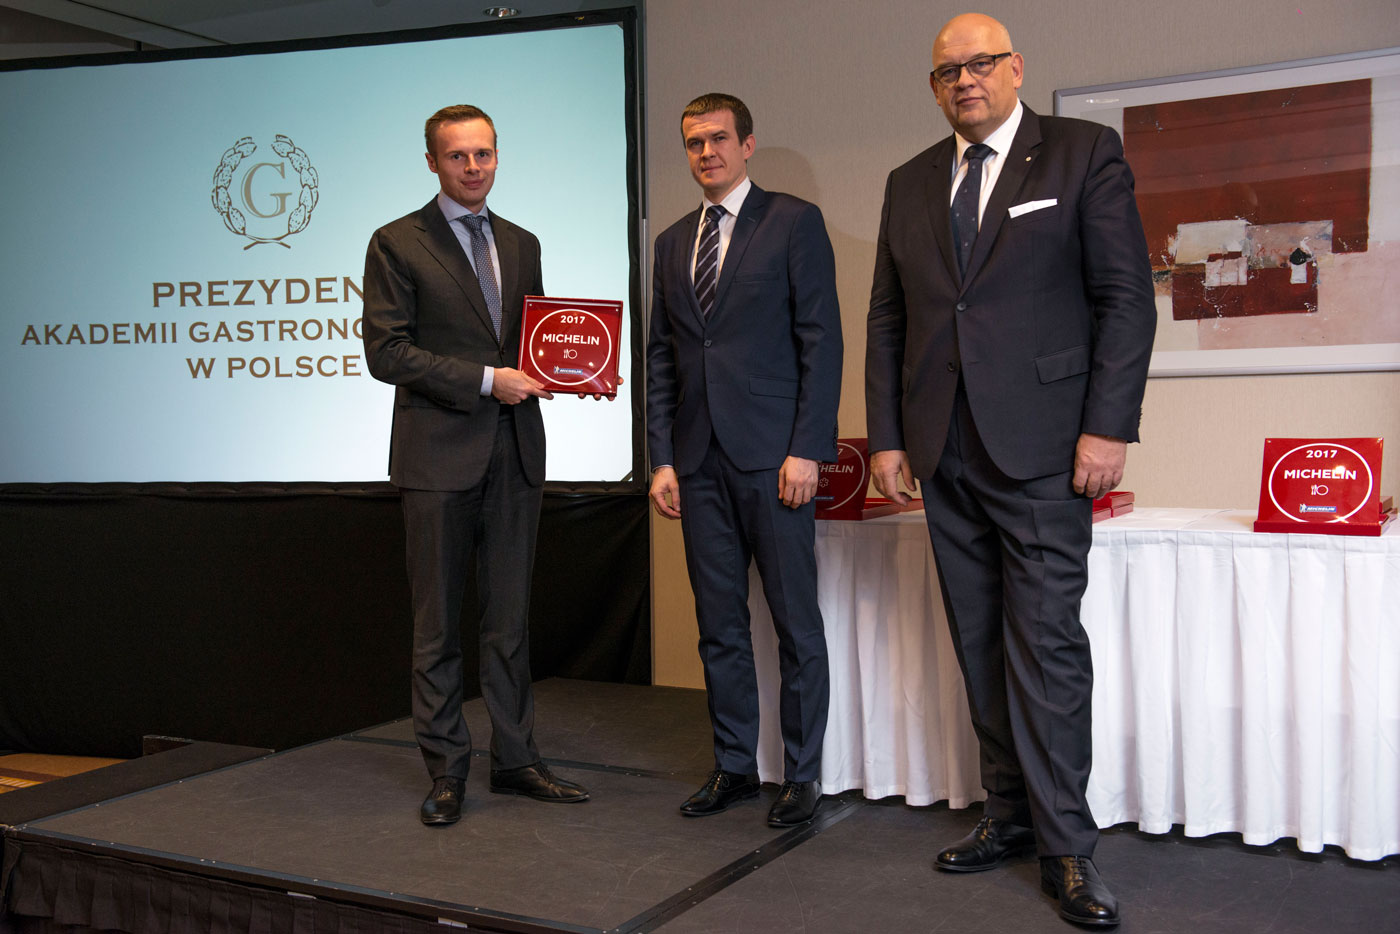 Belvedere Restaurant awarded with Michelin Plaque 2017